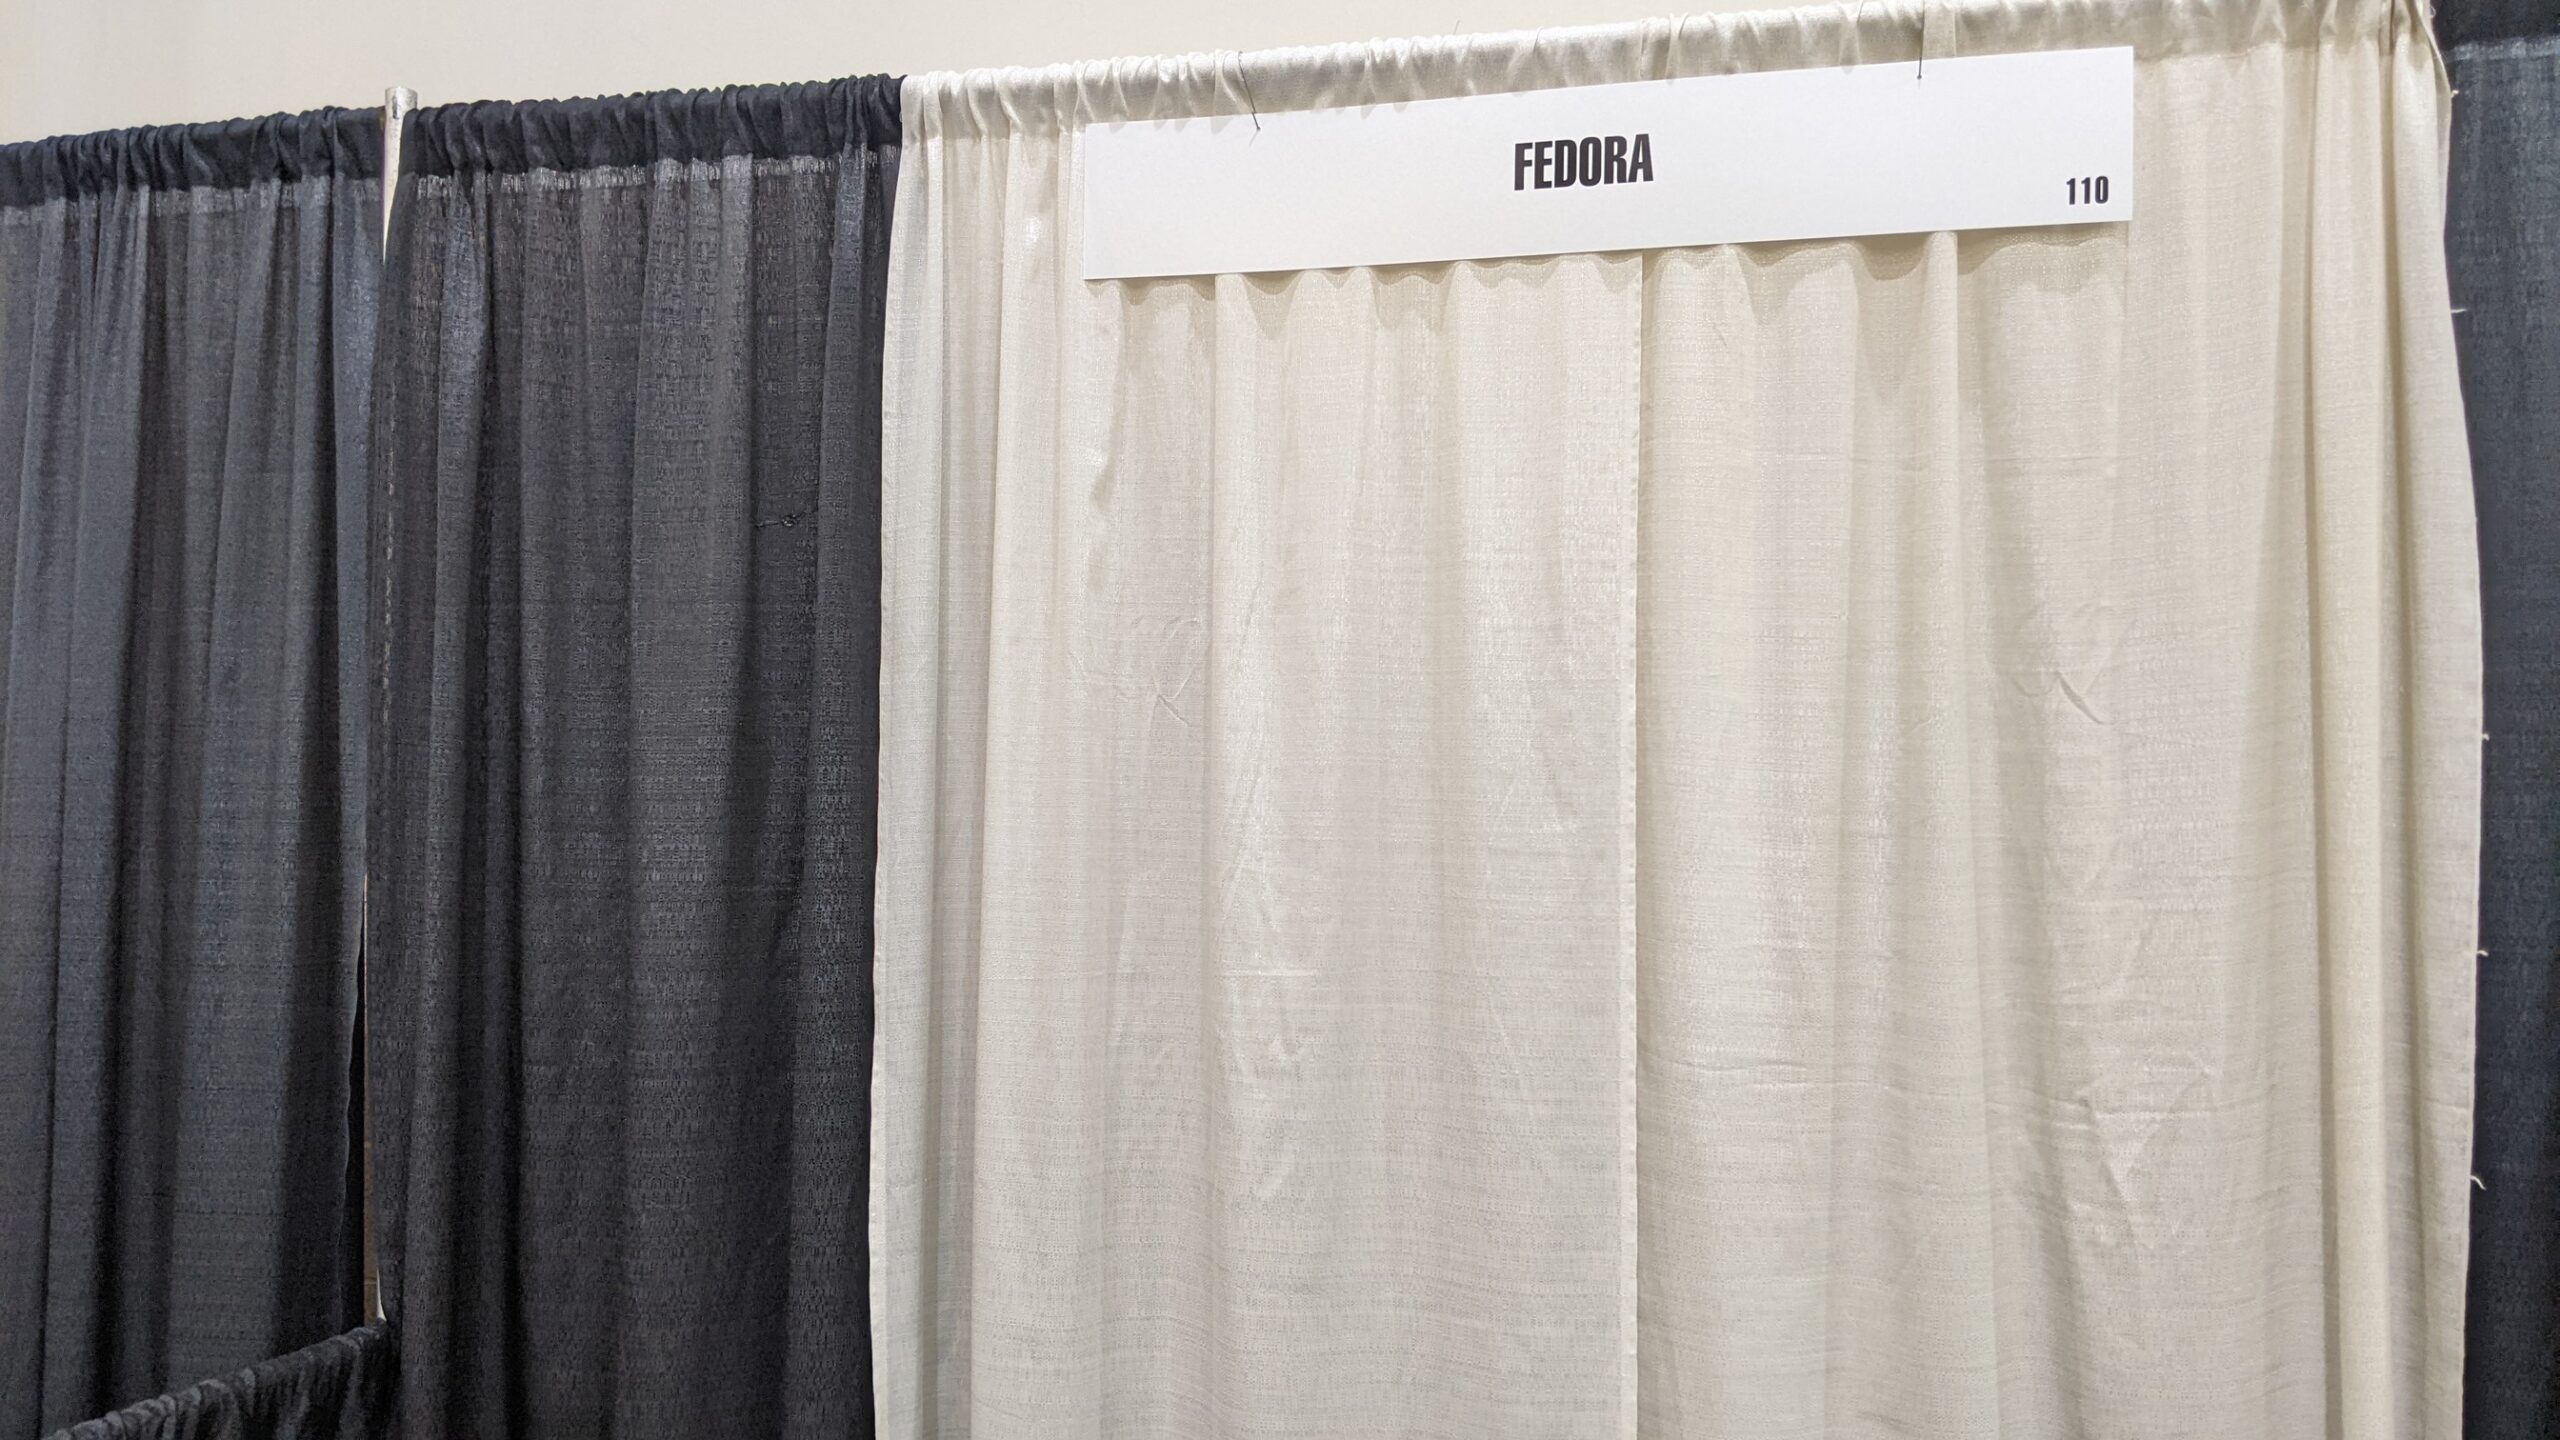 picture of the back of the Fedora booth-a sheet wall